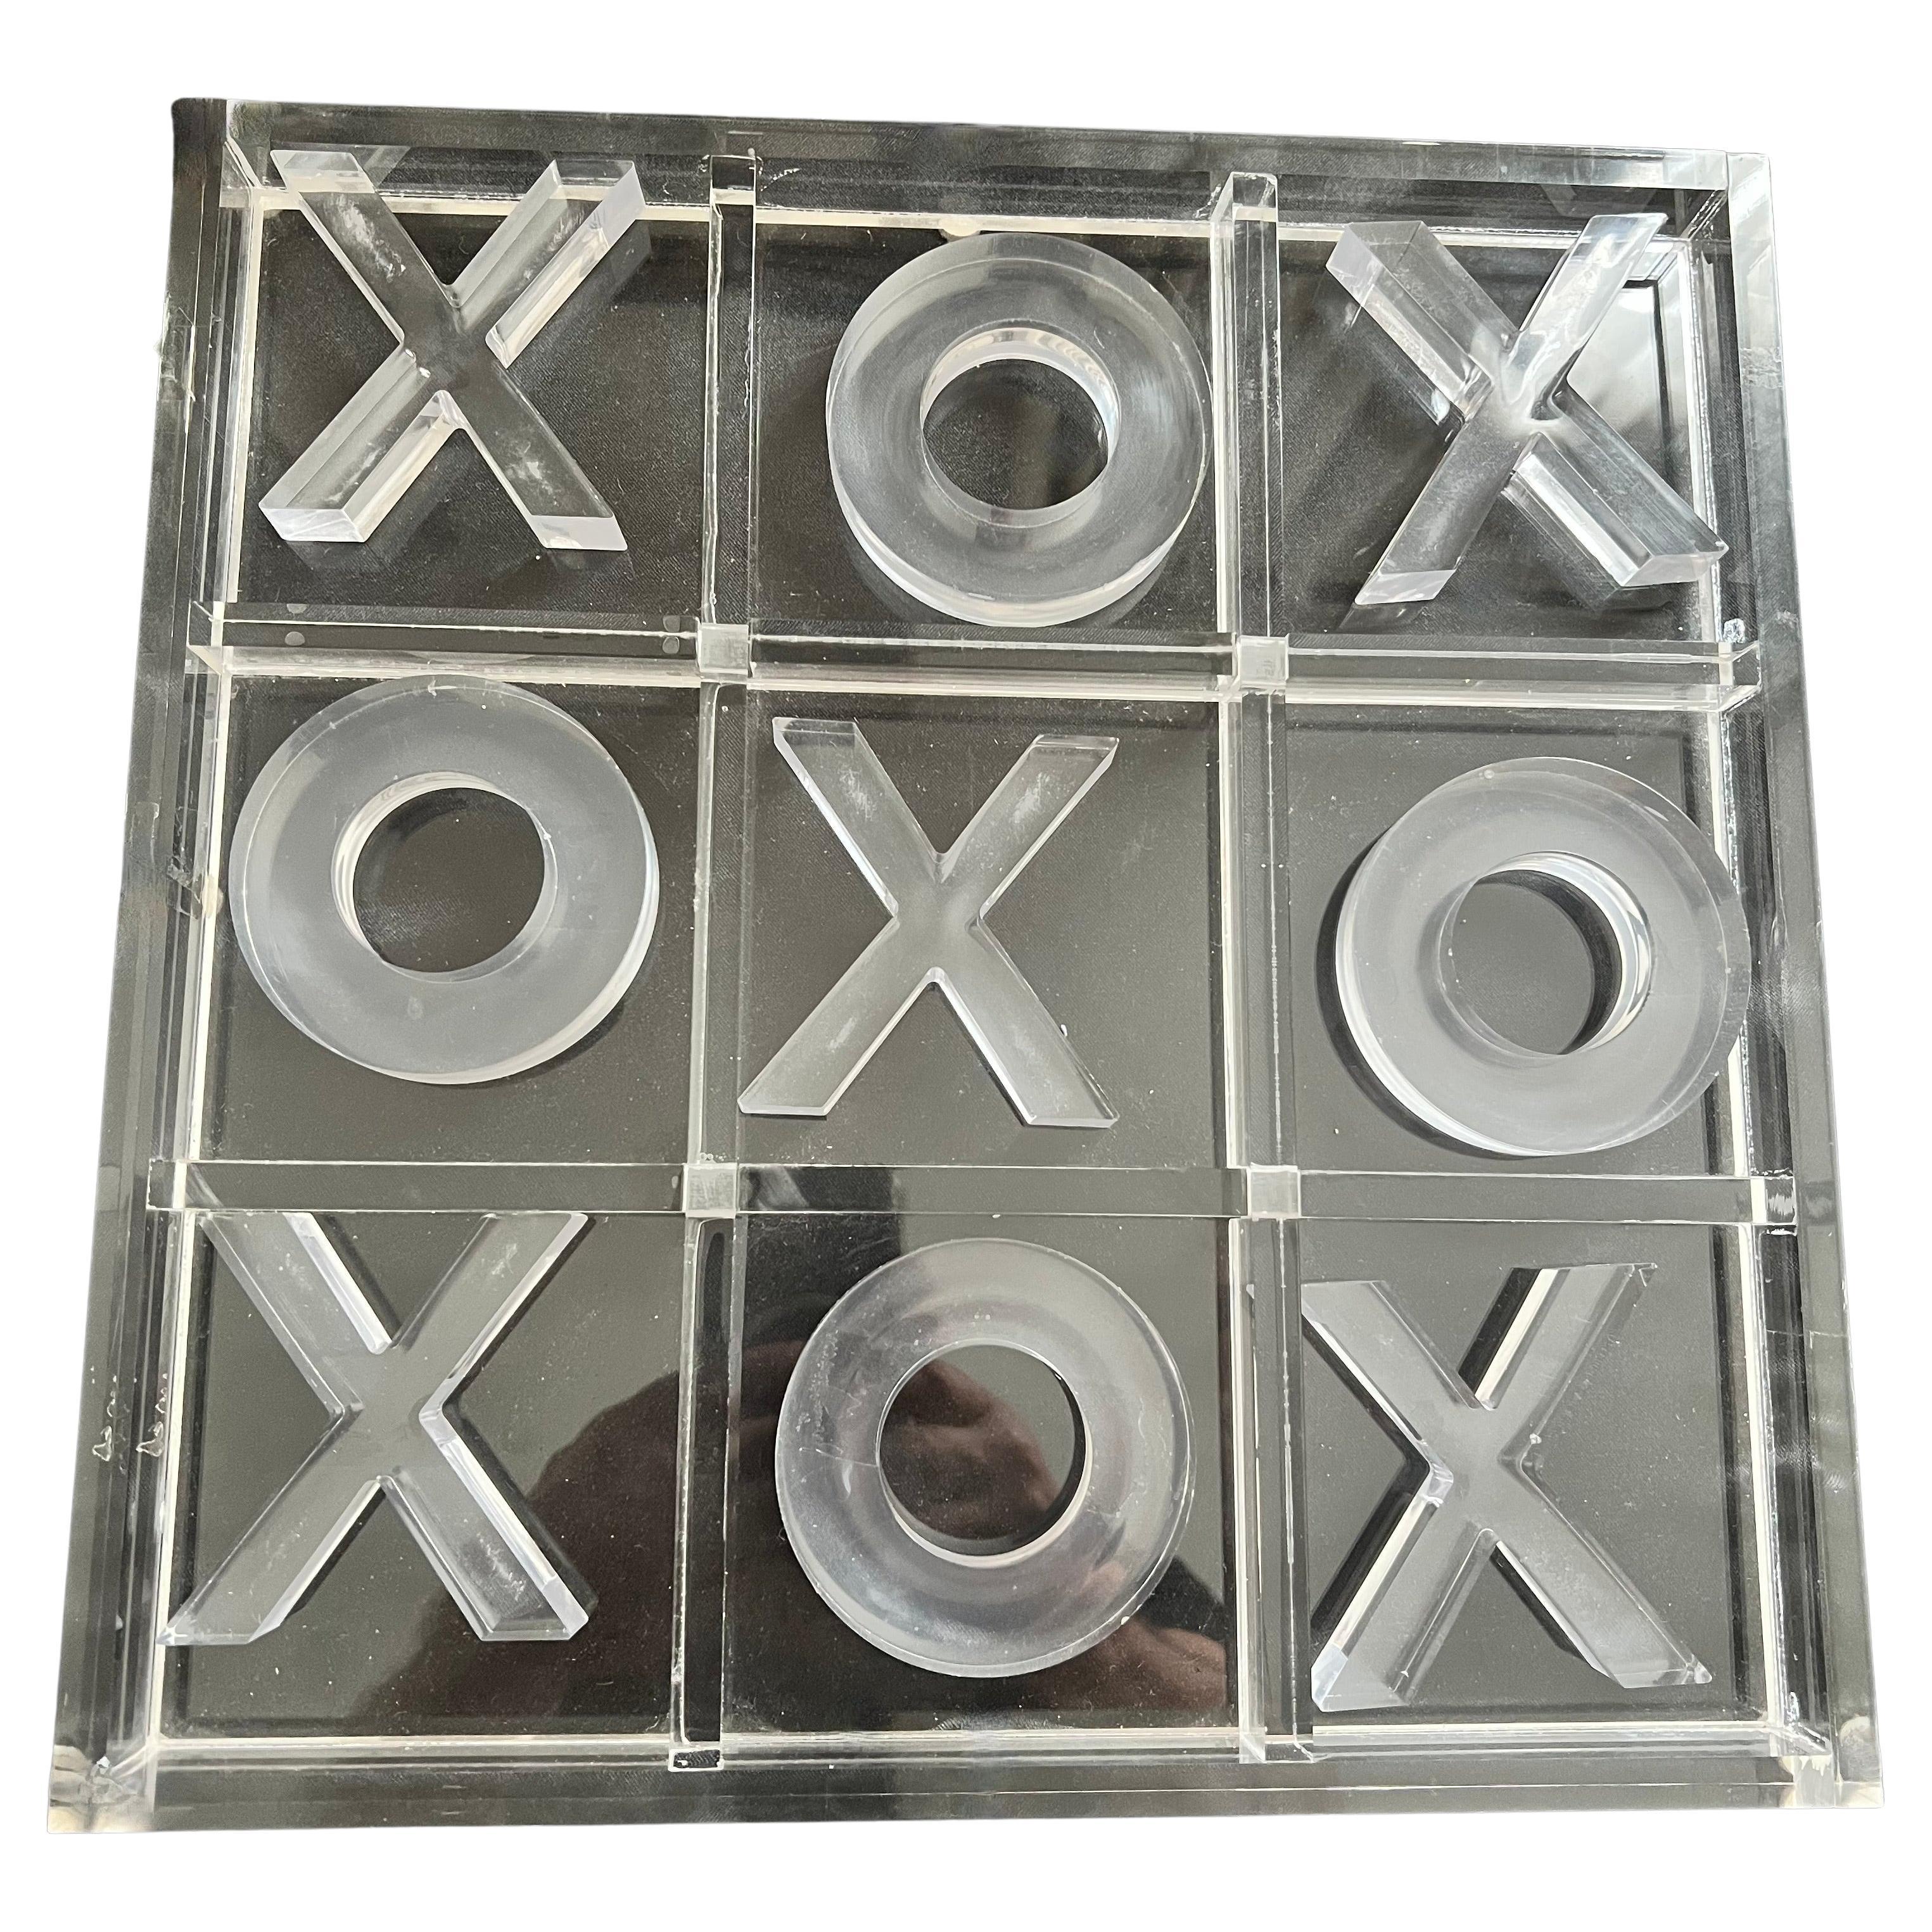 A completely acrylic Tic Tac Toe Board.   The board and all X's and O's are acrylic.  The board and pieces could be as decorative as they are practical - a compliment to many spaces and especially a Childs room. 

looks lovely on a table and a good